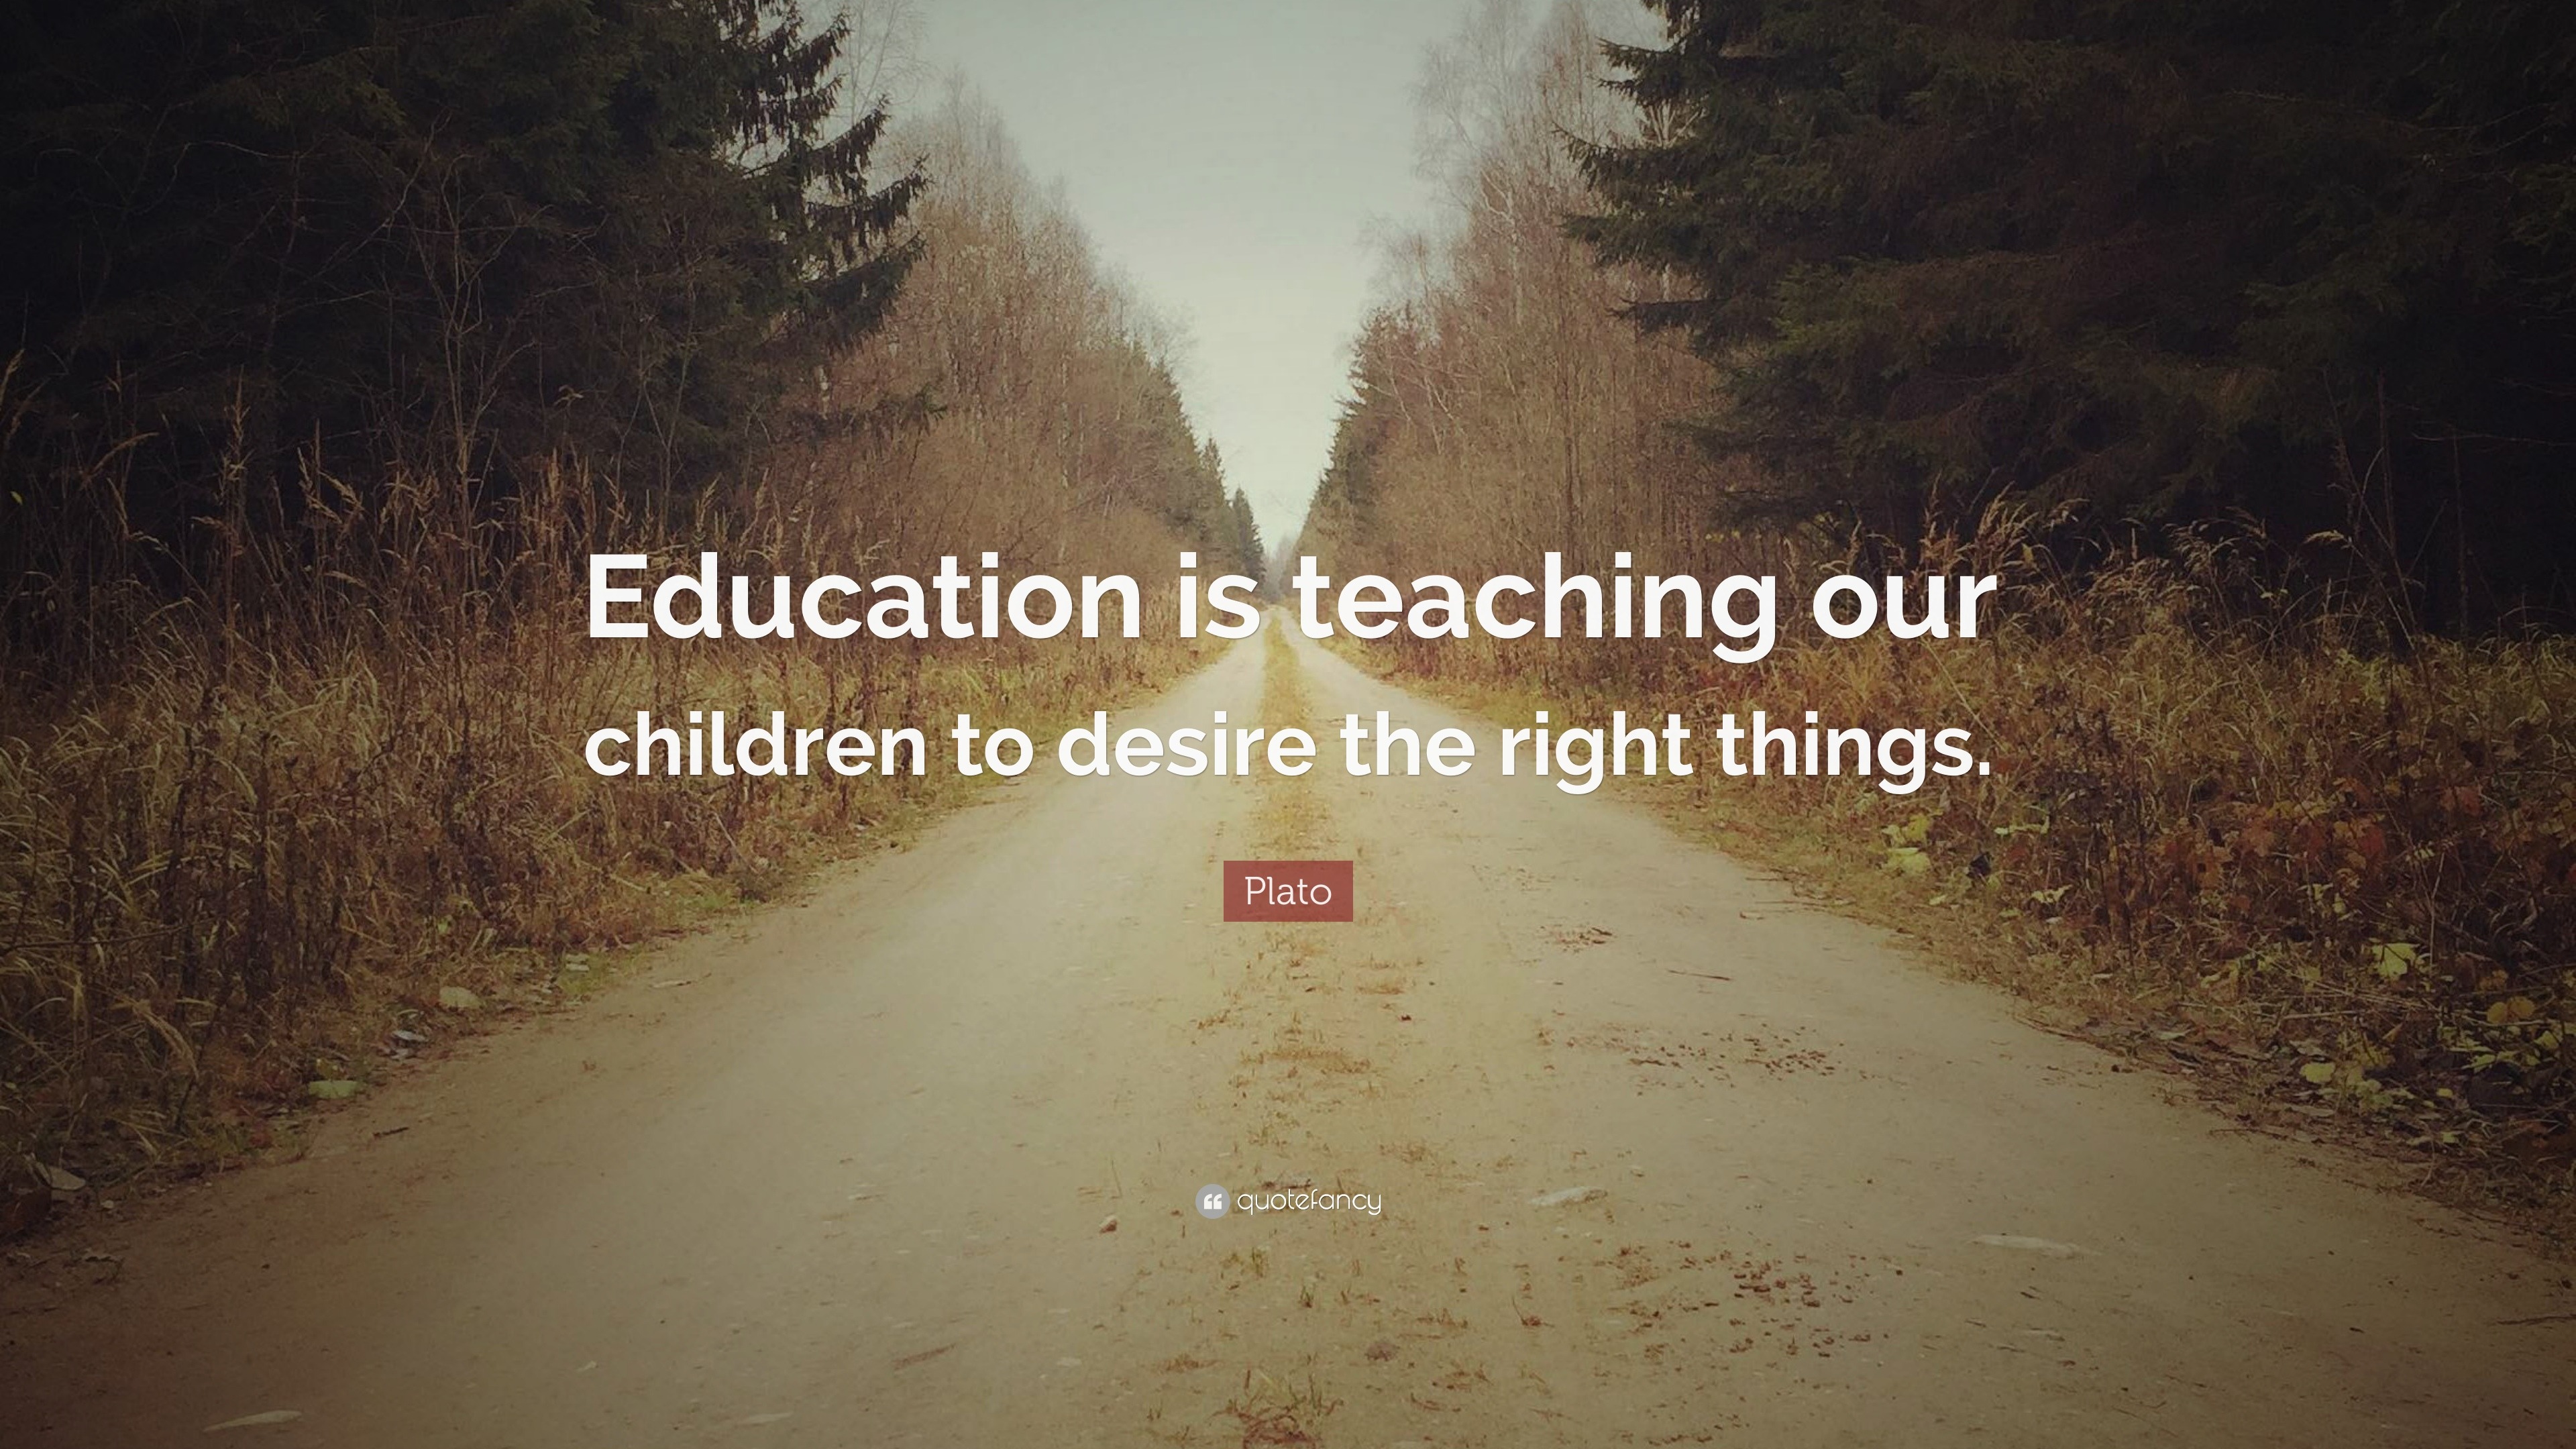 Plato Quote: “Education is teaching our children to desire the right